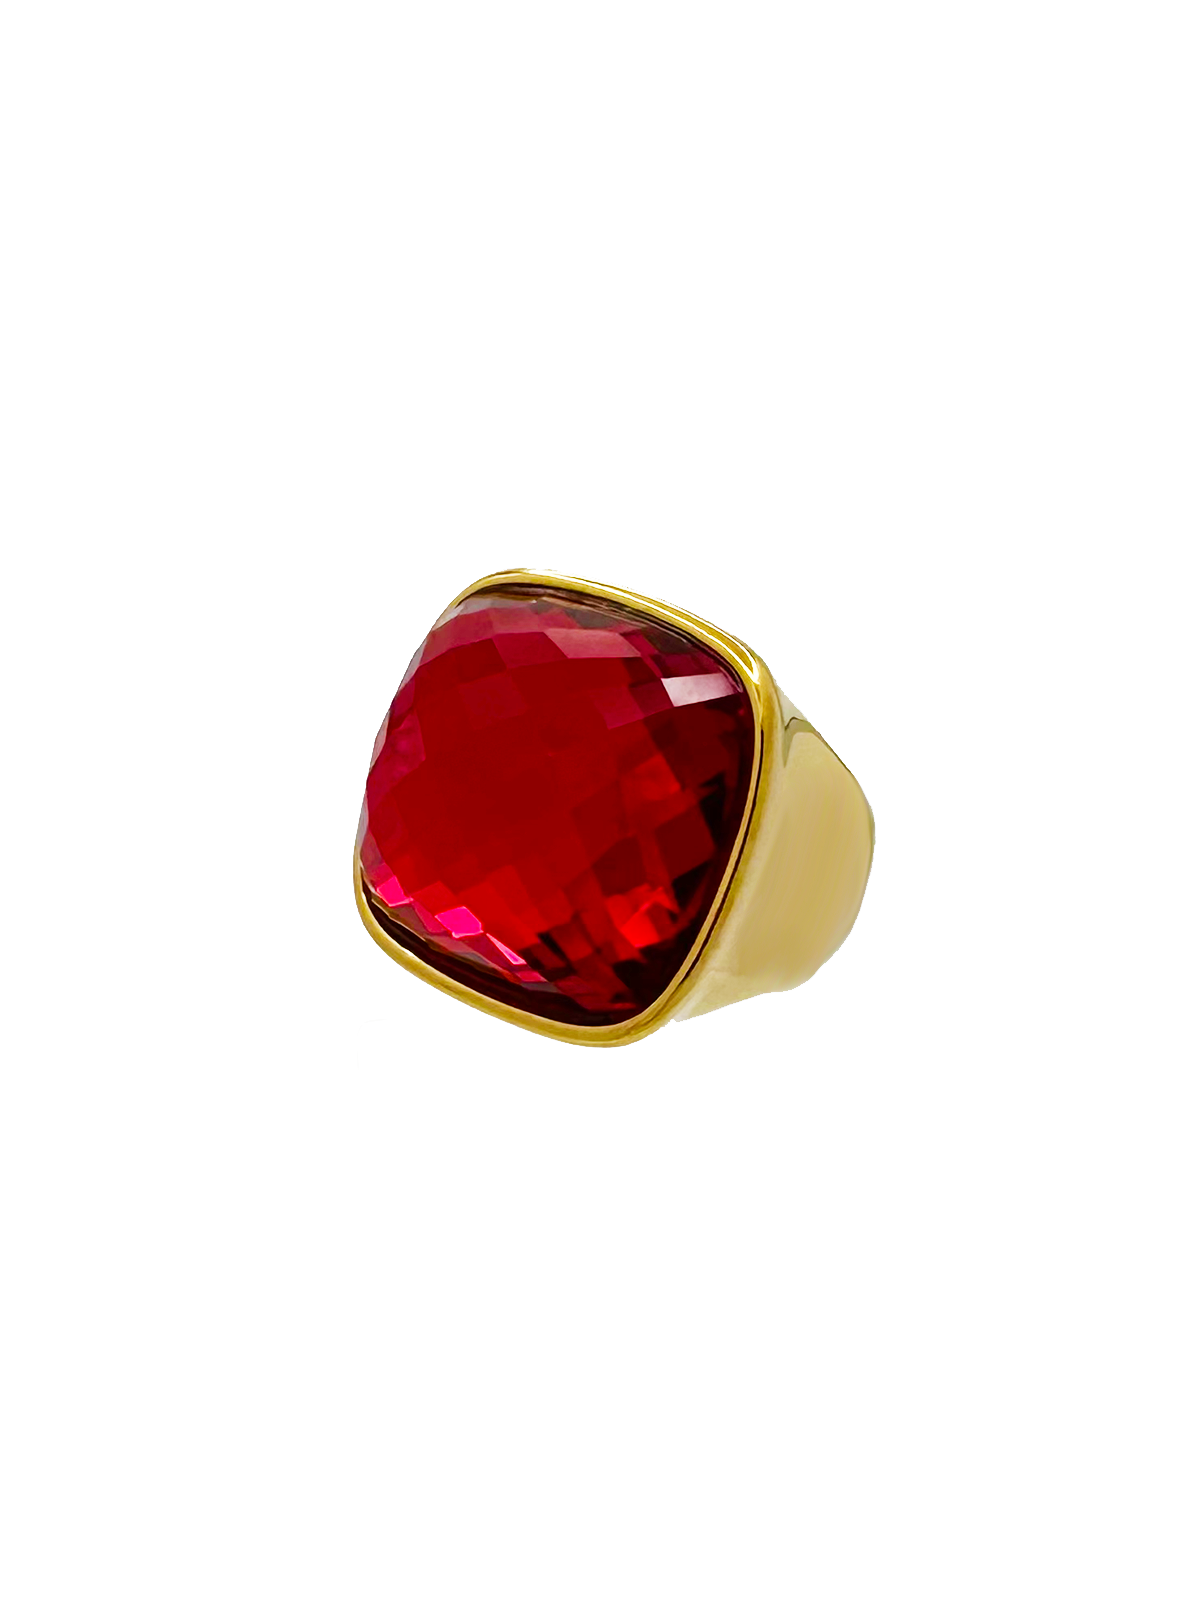 COCKTAIL RING - RUBY